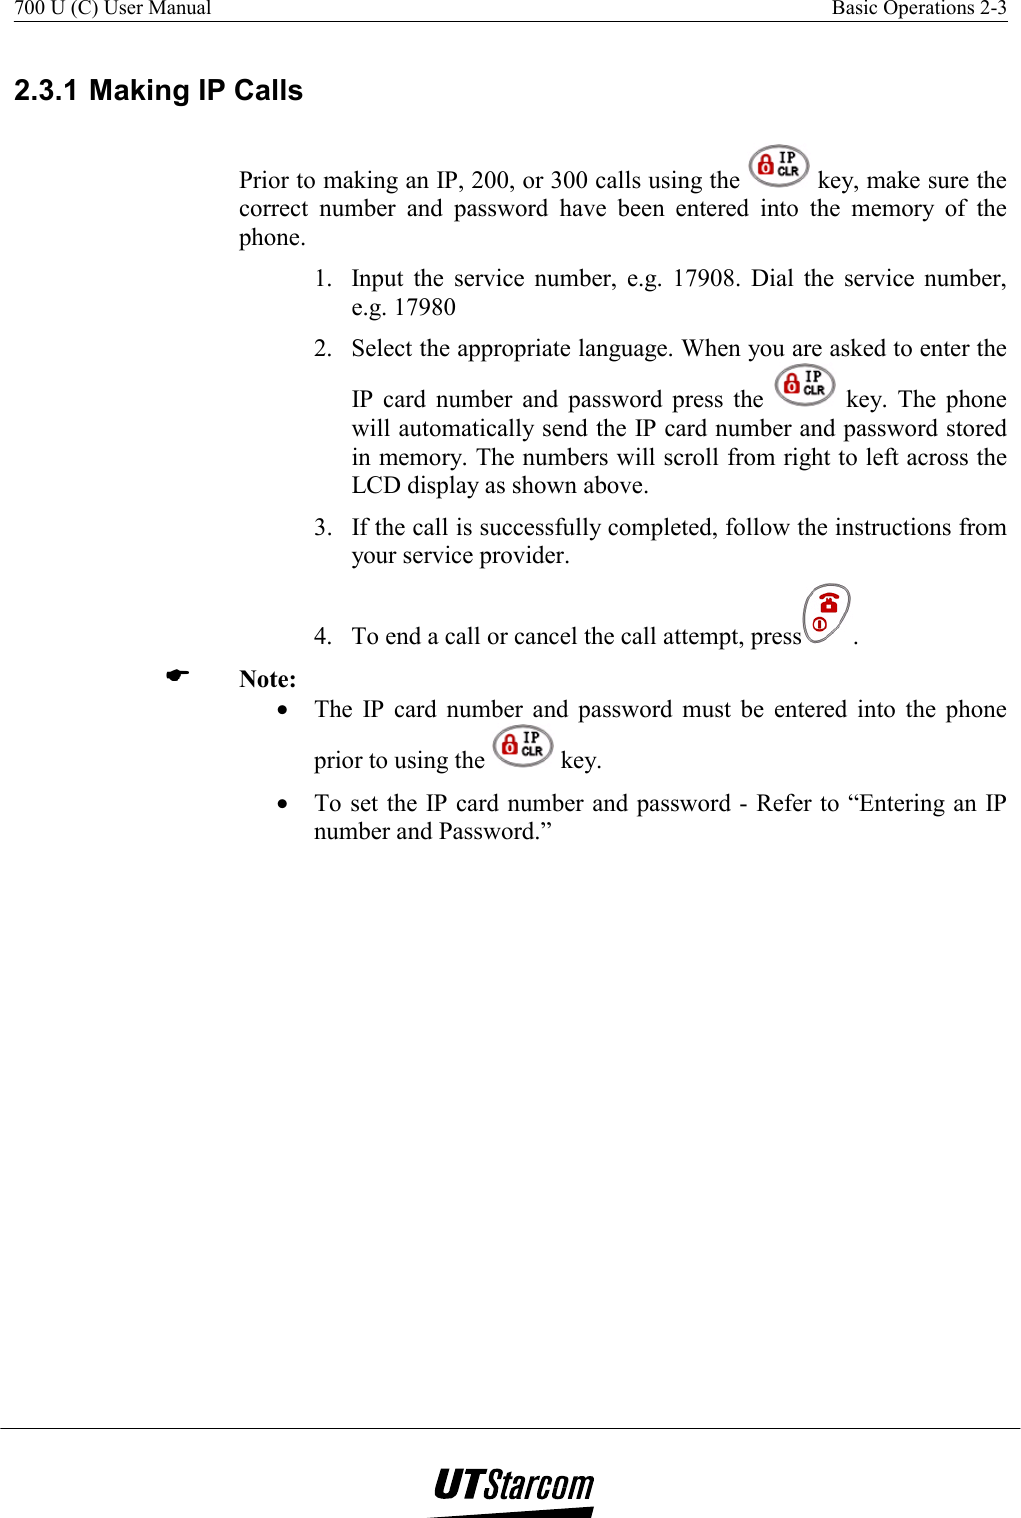 700 U (C) User Manual    Basic Operations 2-3    2.3.1 Making IP Calls Prior to making an IP, 200, or 300 calls using the   key, make sure the correct number and password have been entered into the memory of the phone. 1.  Input the service number, e.g. 17908. Dial the service number, e.g. 17980 2.  Select the appropriate language. When you are asked to enter the IP card number and password press the   key. The phone will automatically send the IP card number and password stored in memory. The numbers will scroll from right to left across the LCD display as shown above. 3.  If the call is successfully completed, follow the instructions from your service provider. 4.  To end a call or cancel the call attempt, press .   Note:  •  The IP card number and password must be entered into the phone prior to using the   key. •  To set the IP card number and password - Refer to “Entering an IP number and Password.” 